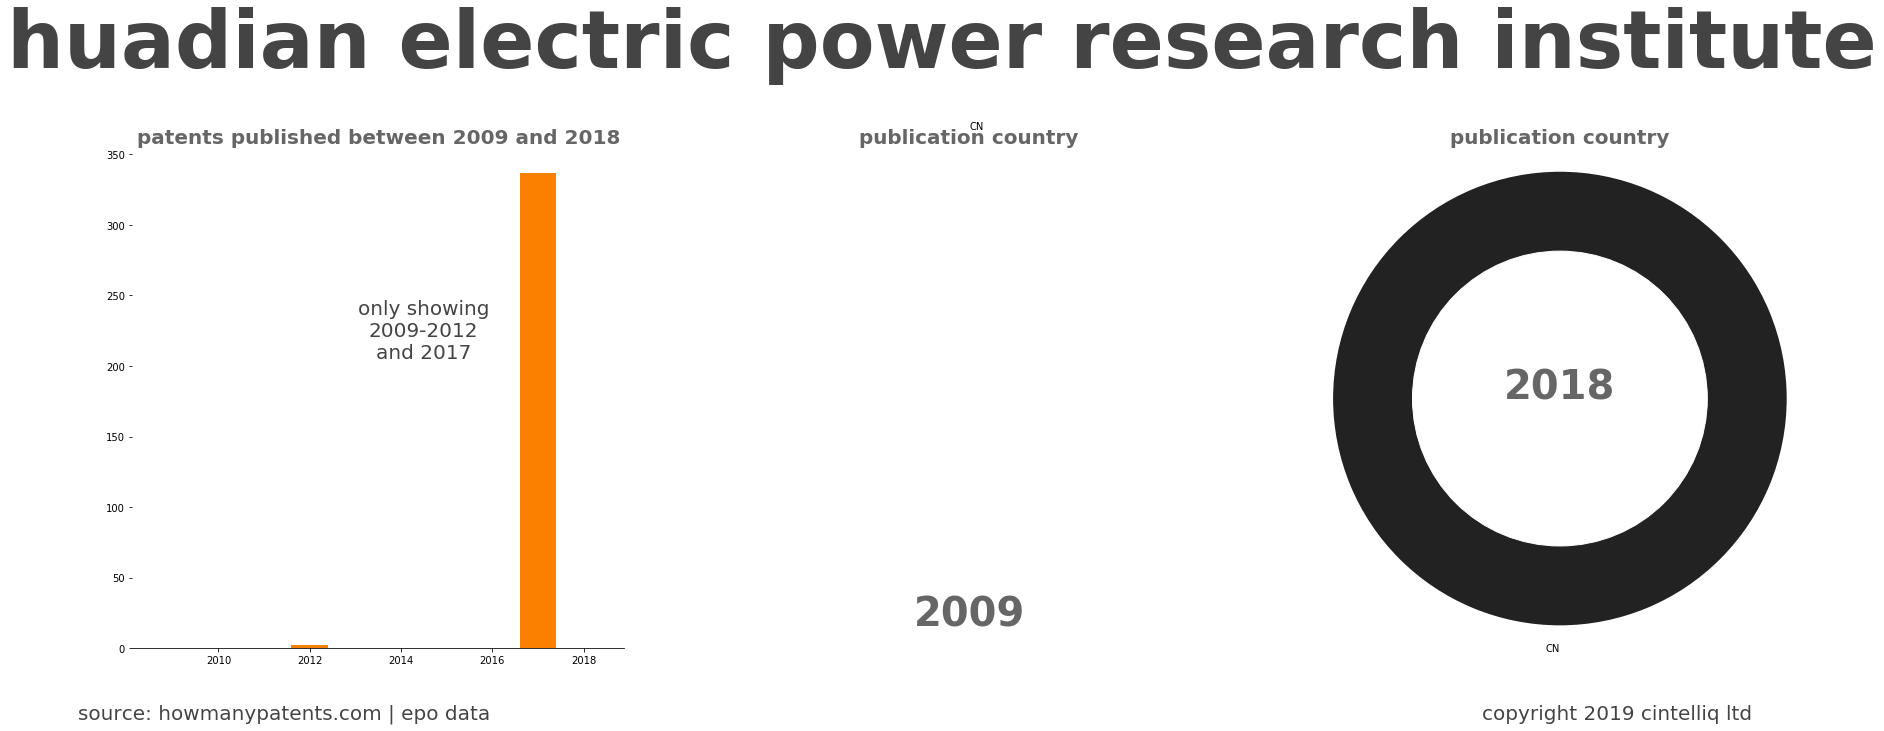 summary of patents for Huadian Electric Power Research Institute